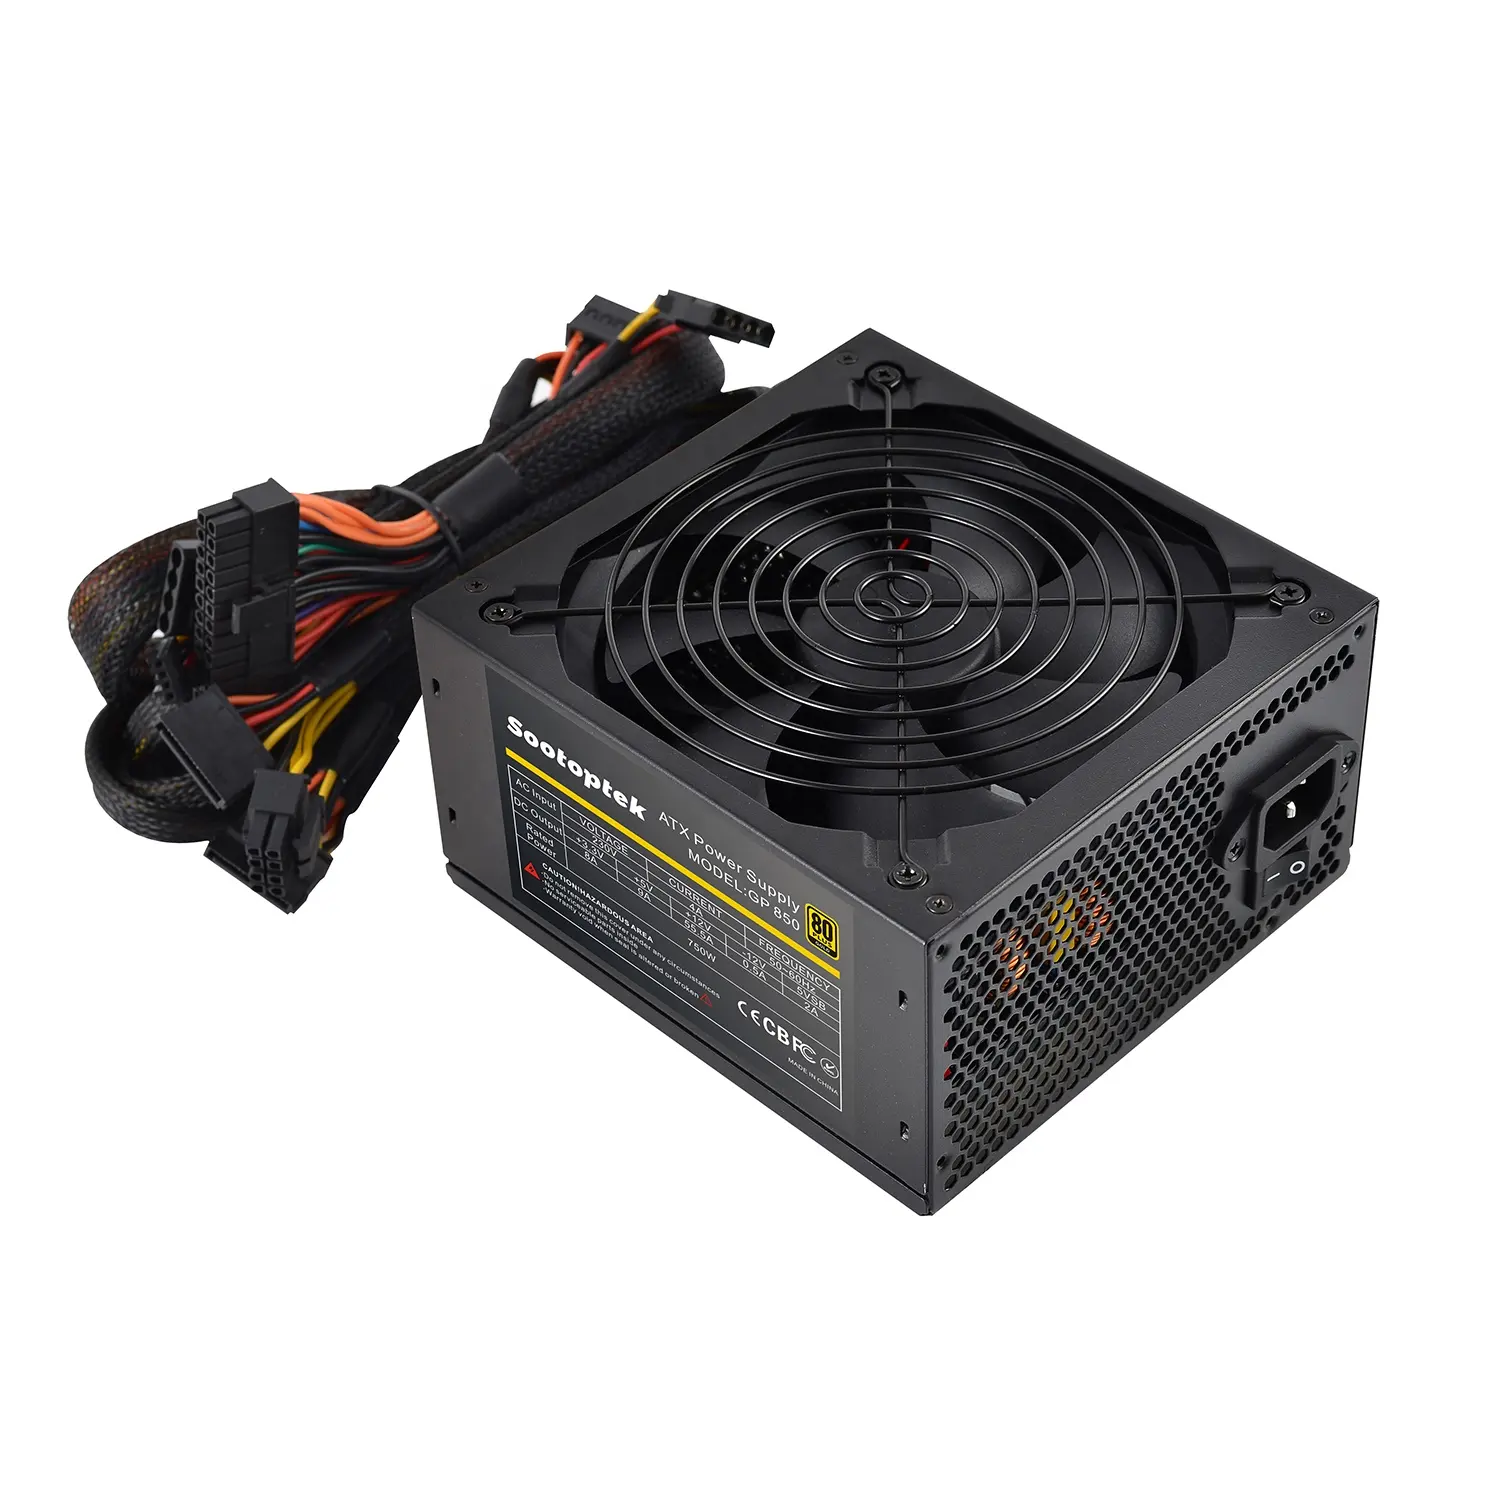 Atx Psu 750W 80 Plus Gold Hot Selling I/O Switching Computer Voeding Apfc Volledige Spanning Oem